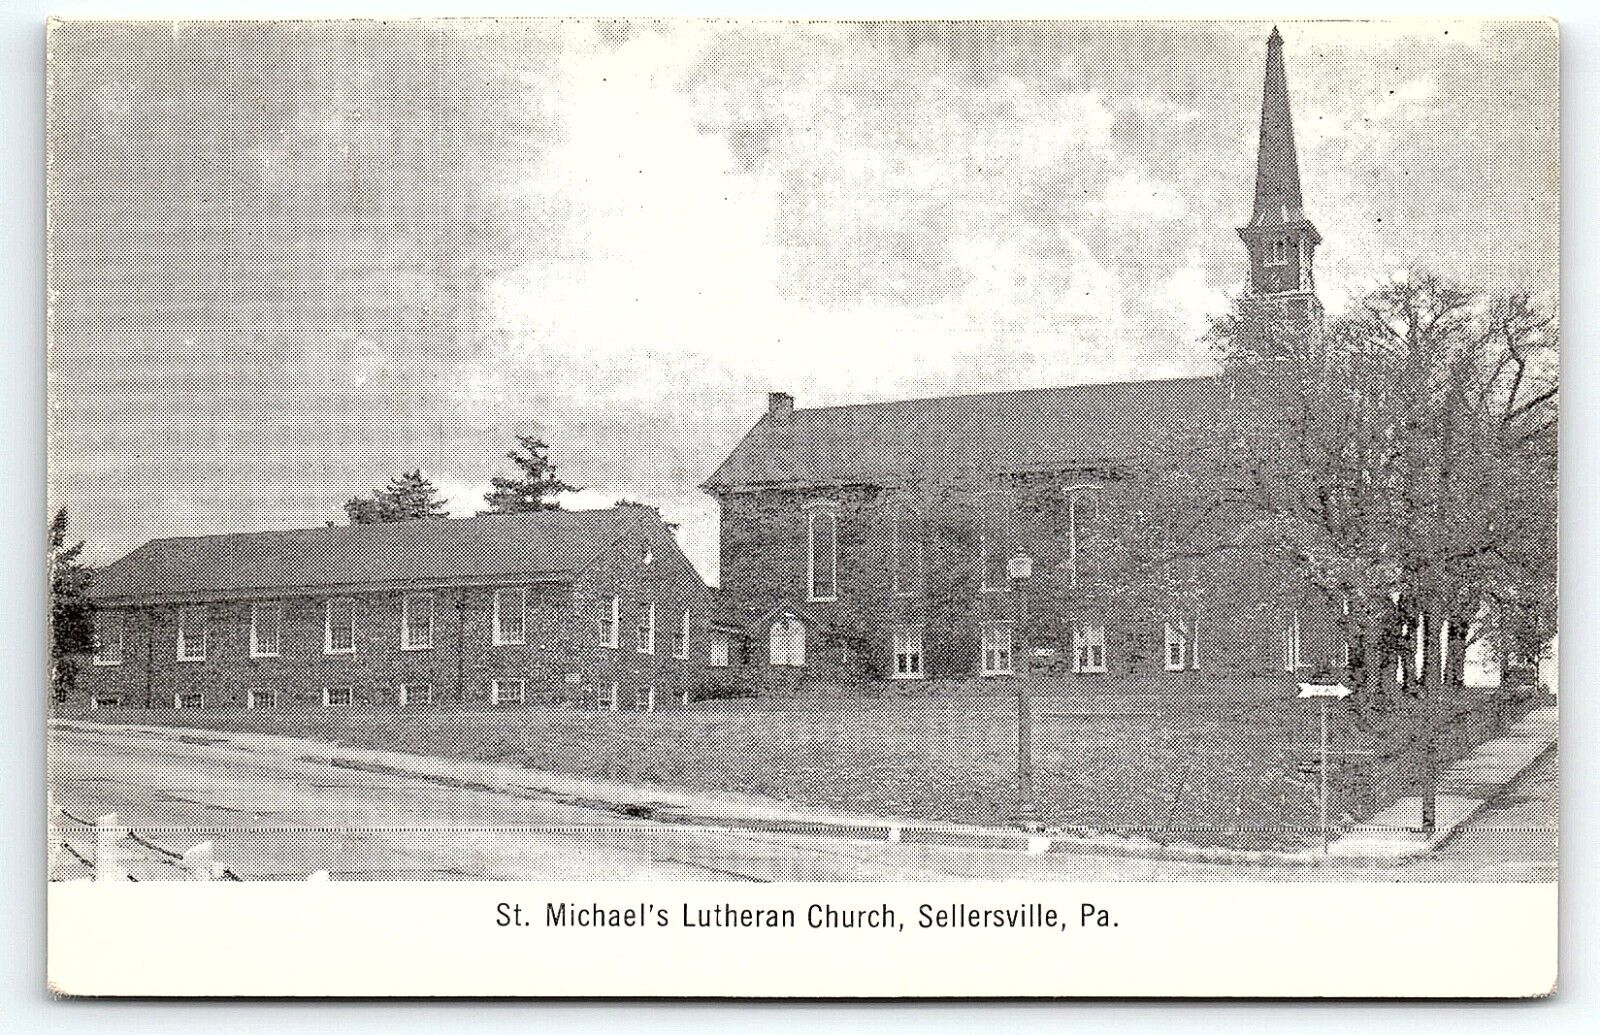 c1910 SELLERSVILLE PA ST MICHAEL'S LUTHERAN CHURCH EARLY UNPOSTED POSTCARD P4171